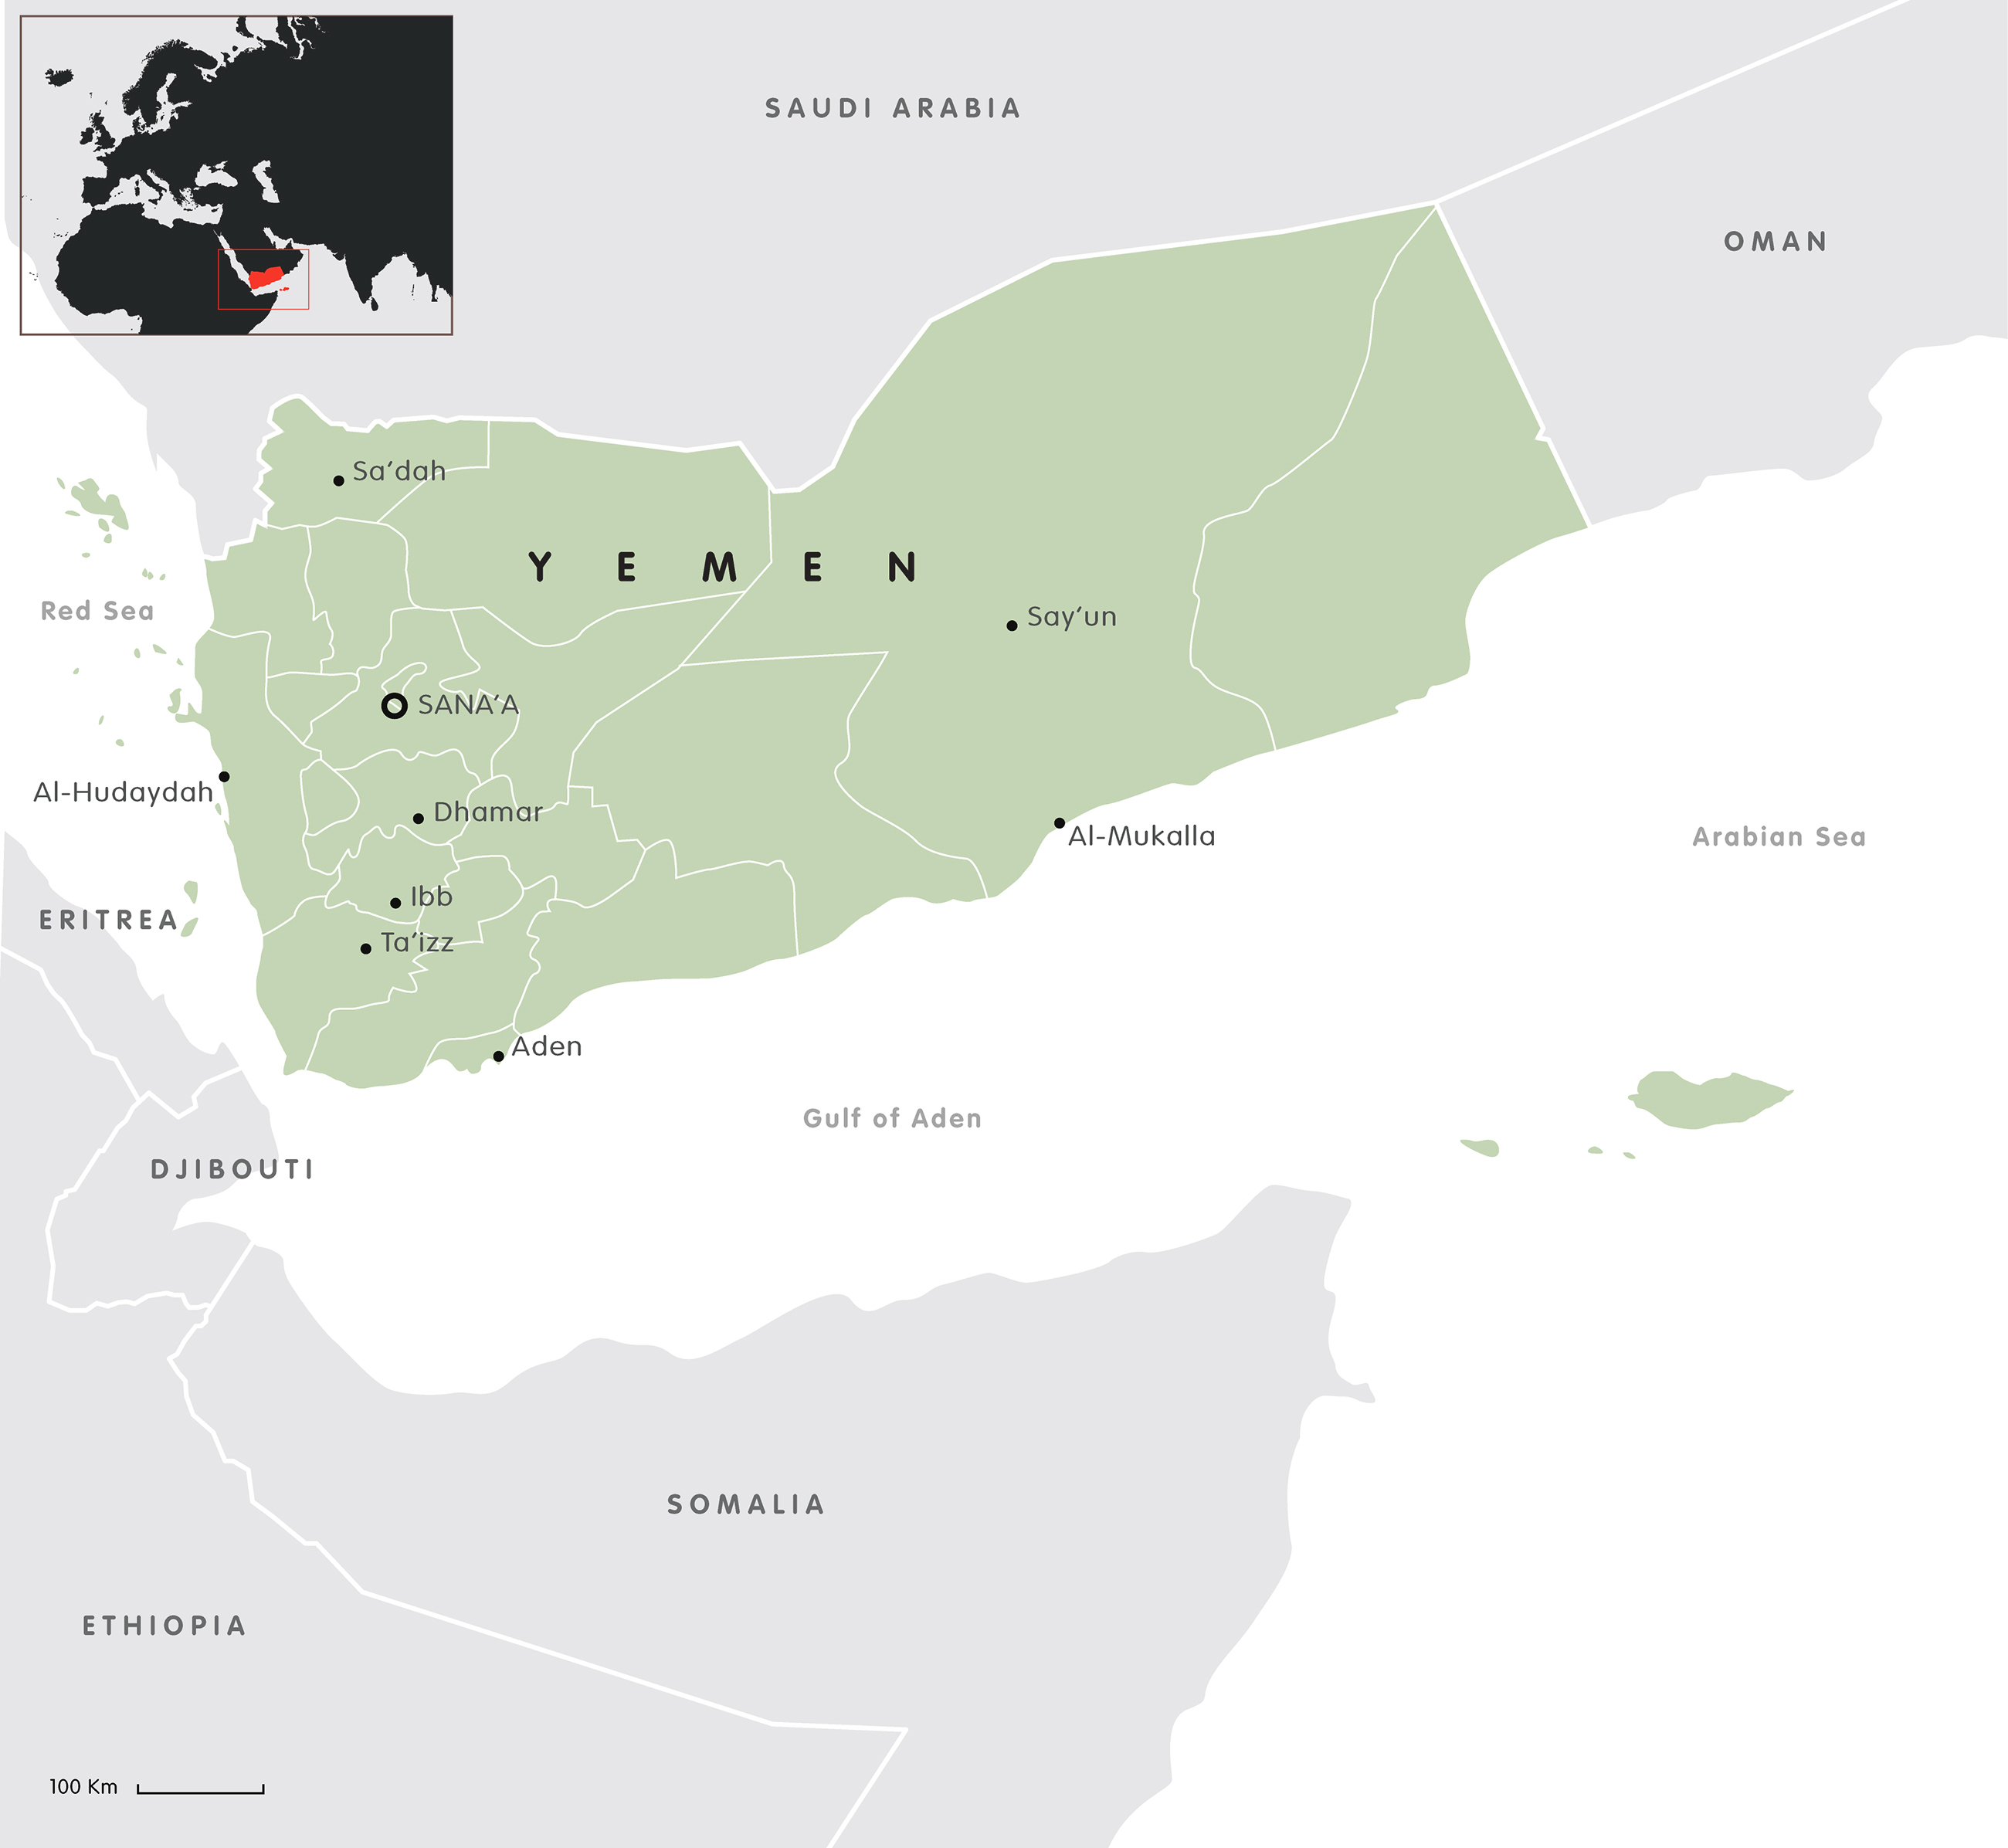 Mappa dello Yemen. Credits to: European Council on Foreign Relations.